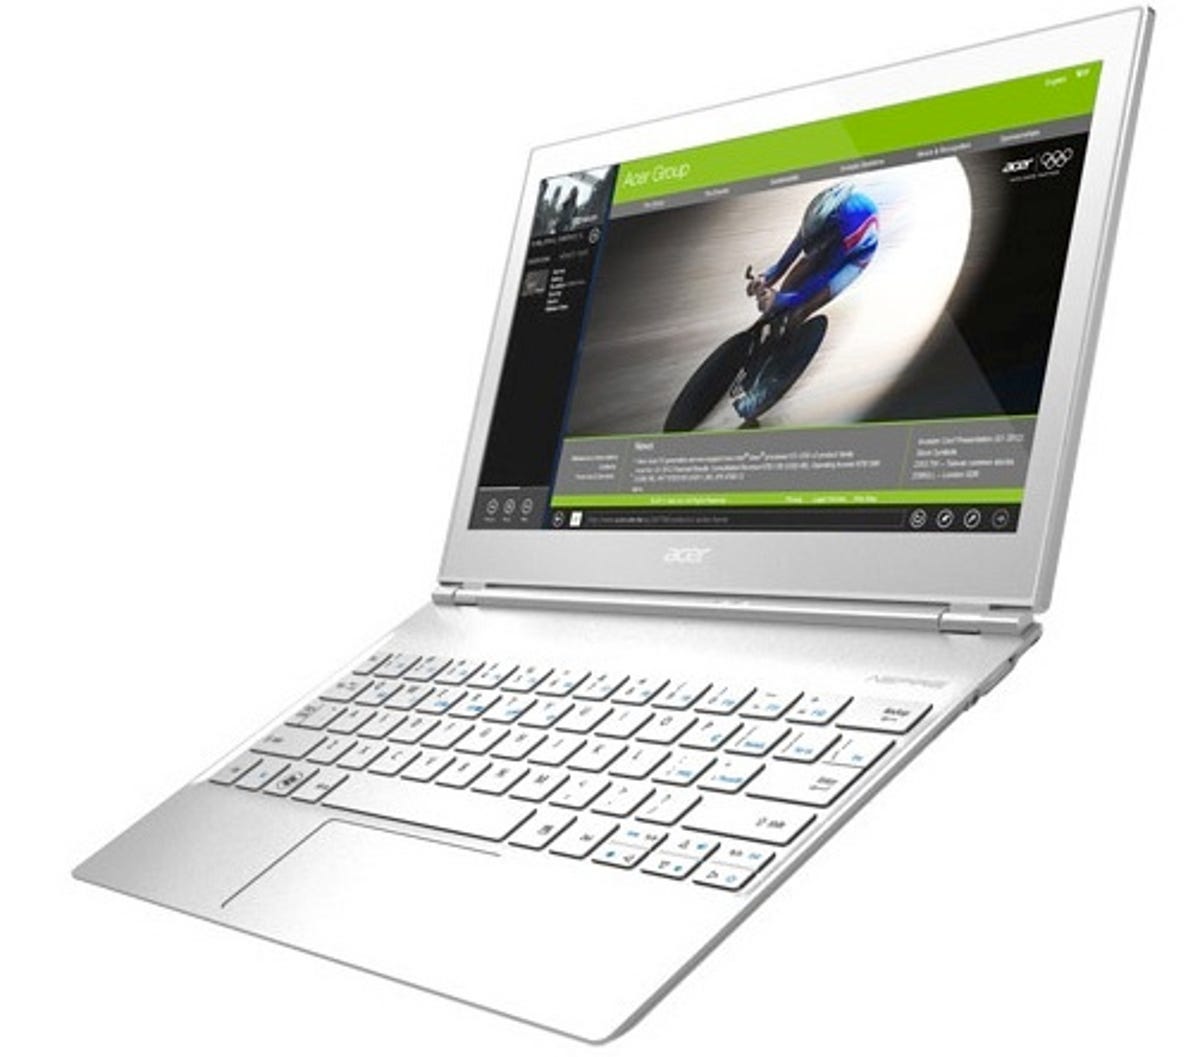 Touchscreen-touting 11.6-inch Acer Aspire. It's powered by an Intel Ivy Bridge chip.